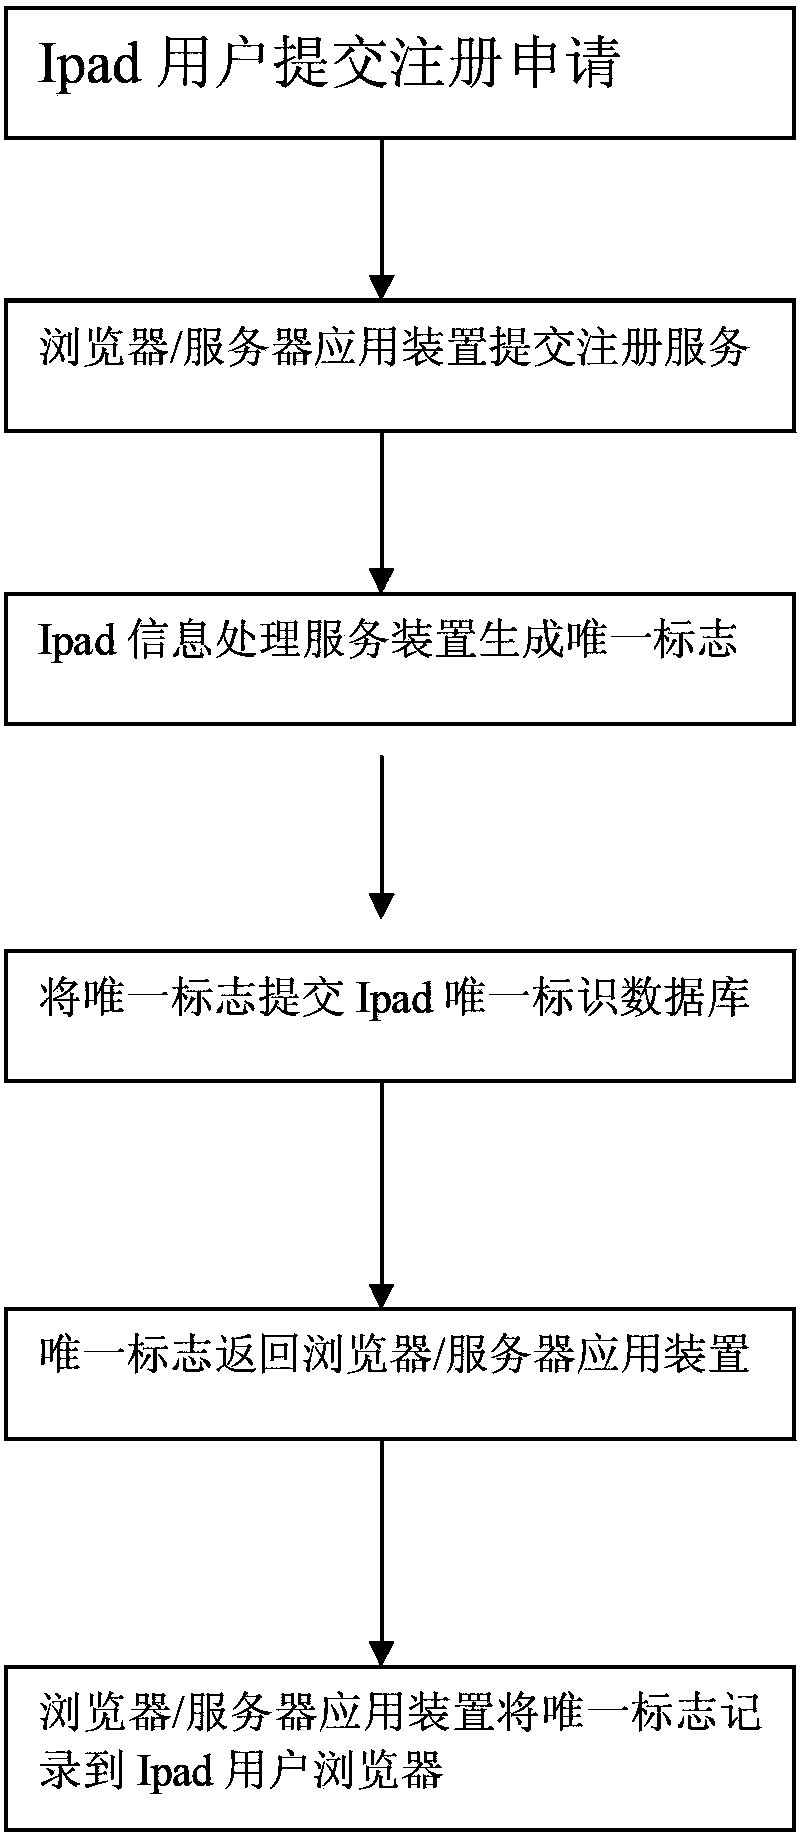 Method and device for achieving user hardware binding between browser/server (B/S) system and Ipad